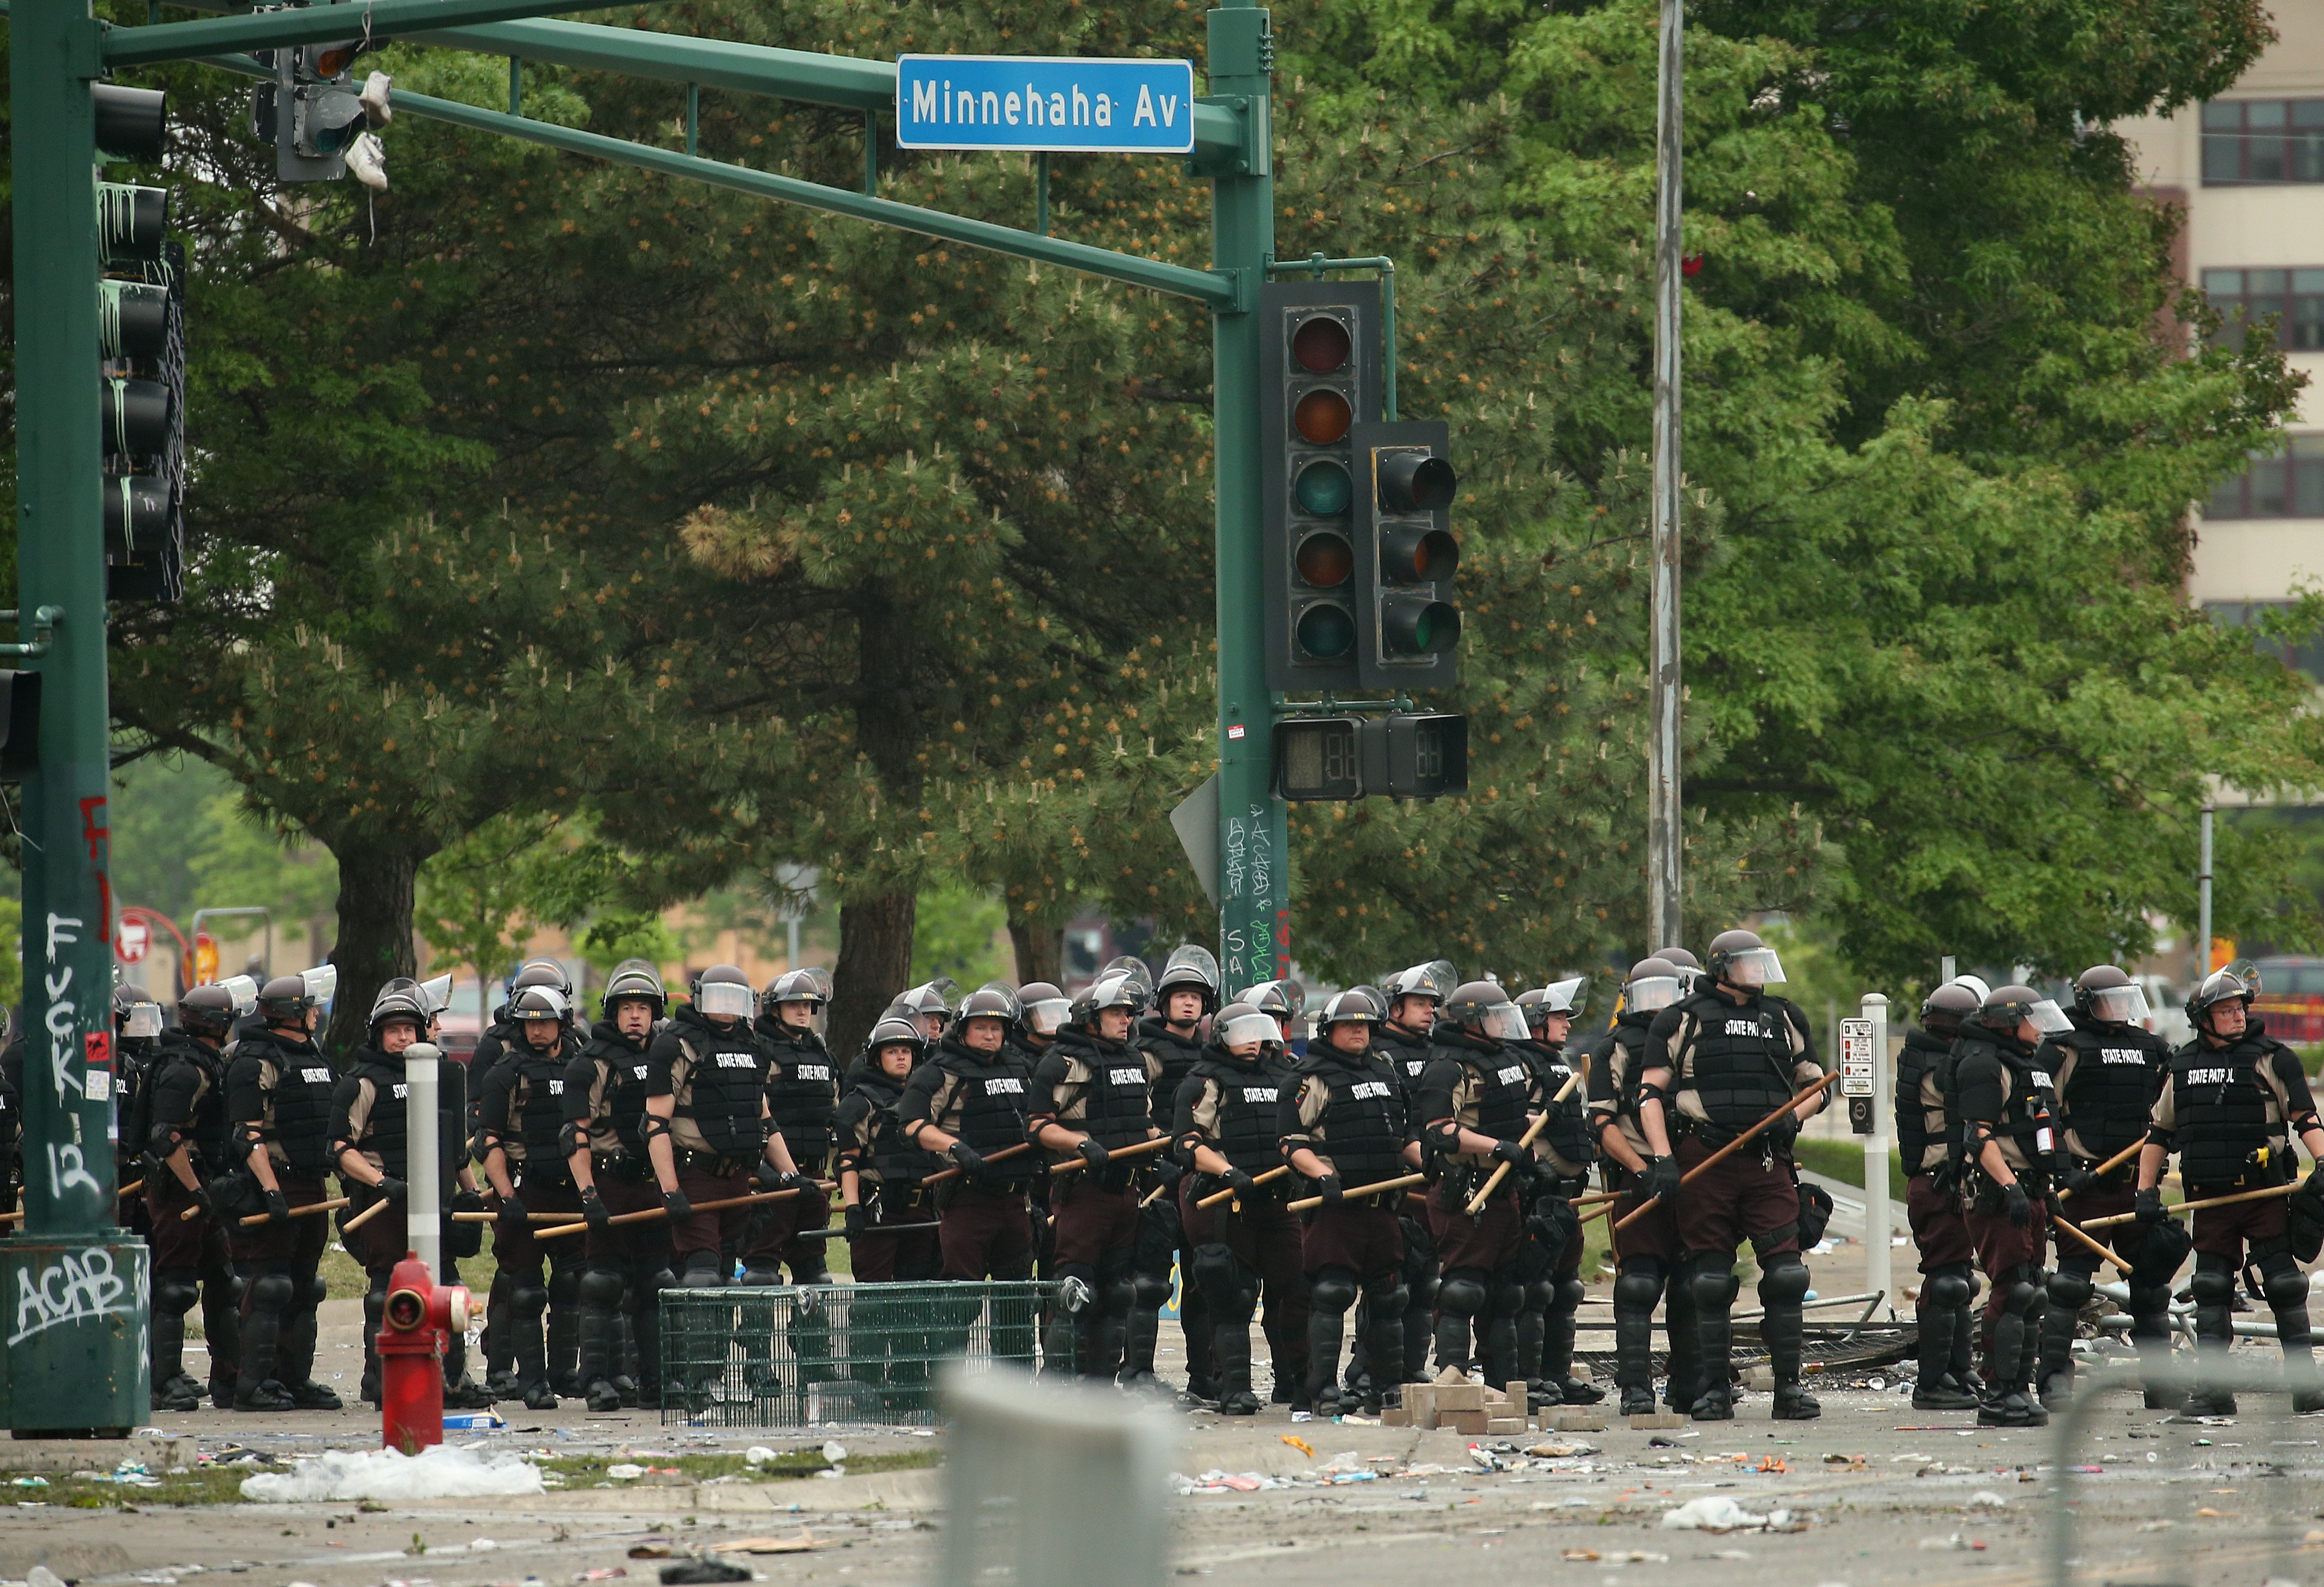 MINNEAPOLIS, MINNESOTA - MAY 29: Police carrying batons hold a line on the fourth day of protests on May 29, 2020 in Minneapolis, Minnesota. The National Guard has been activated as protests continue after the death of George Floyd which has caused widespread destruction and fires across Minneapolis and St. Paul. (Photo by Scott Olson/Getty Images)